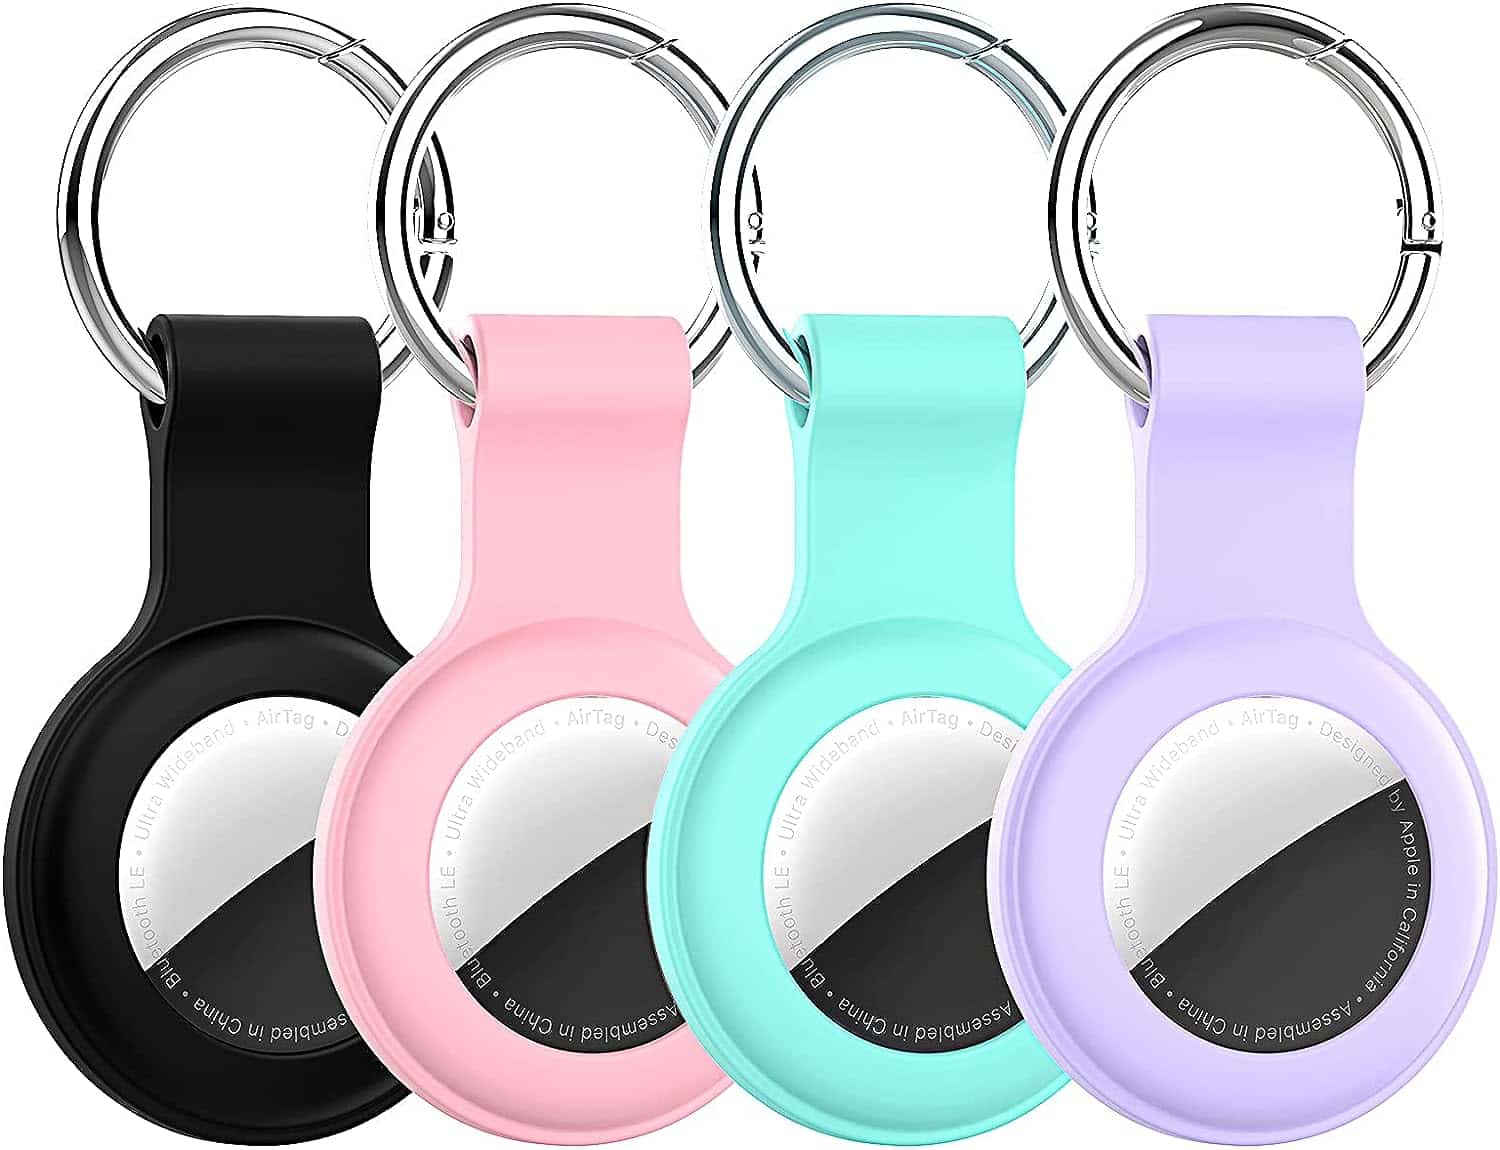 Enhance Your AirTag Experience with the Compatible AirTag Case Keychain